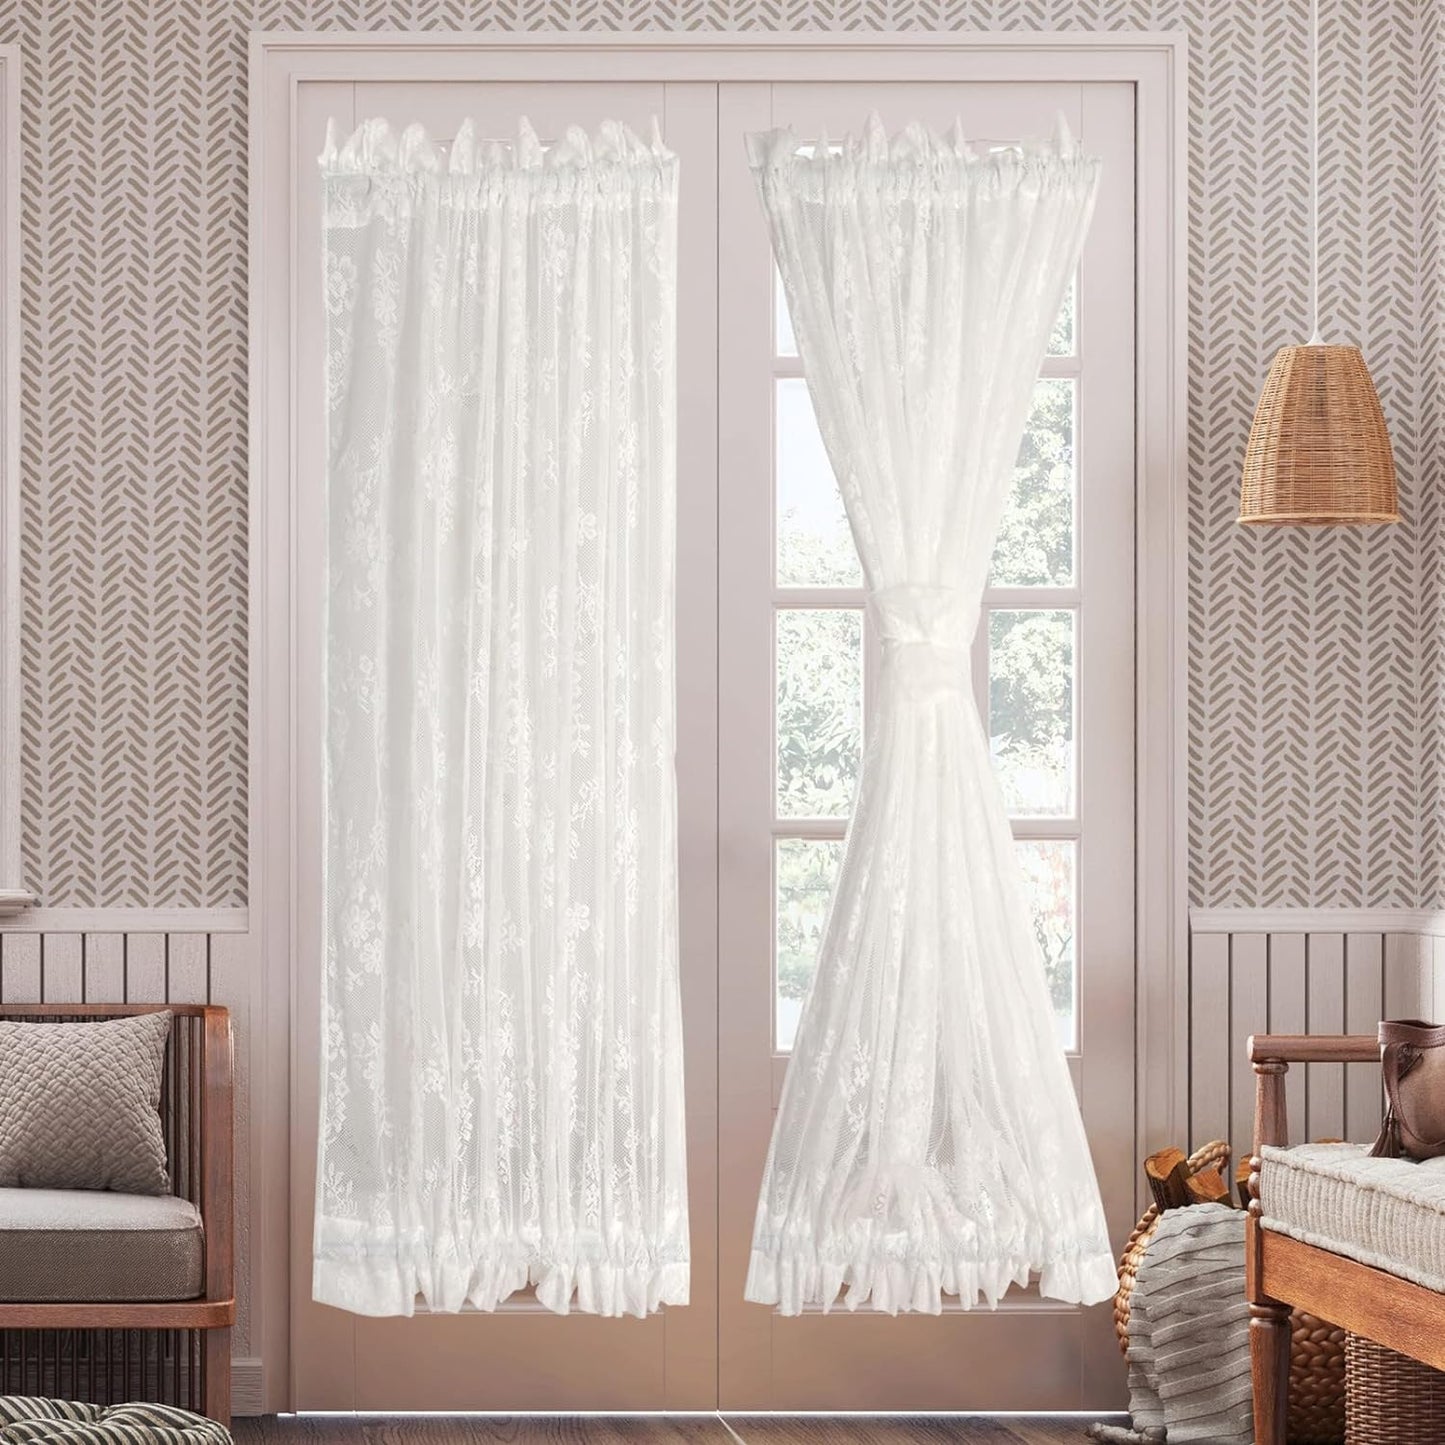 Rloncomix Rod Pocket Lace Sheer Door Curtain French White Mesh Light Filtering Airy Floral Semi Voile Curtain for Kitchen Cafe Bedroom Living Room with Tieback, 2 Panels 72 Inches  BAIHT HOME 2 54"W X 72"L 